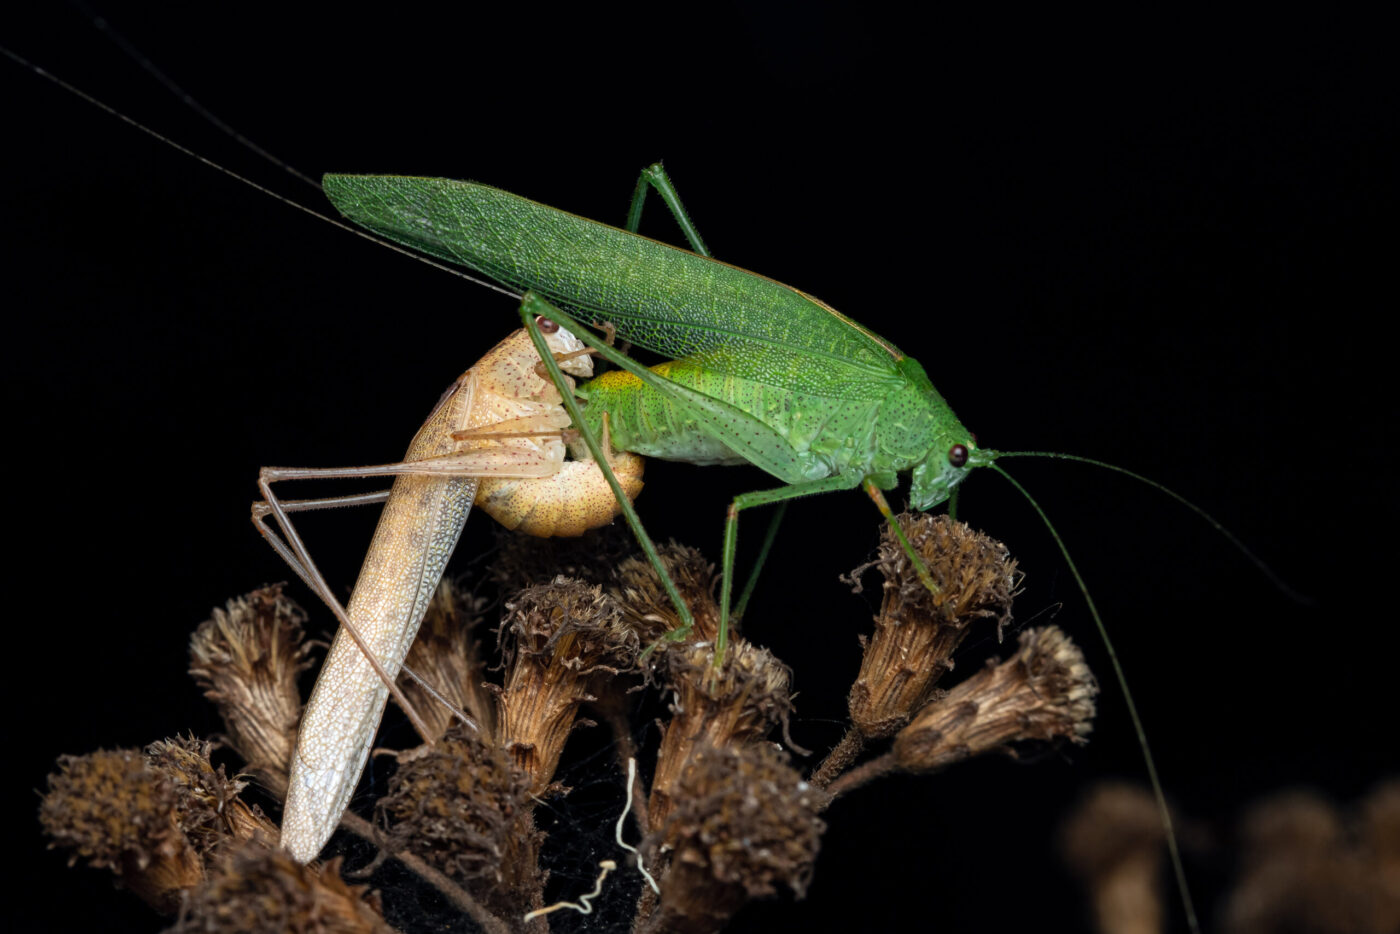 Katydids and crickets are the one's who compose the major symphonies of the night. And it's the males who always sing the love hymns, these Loverboys